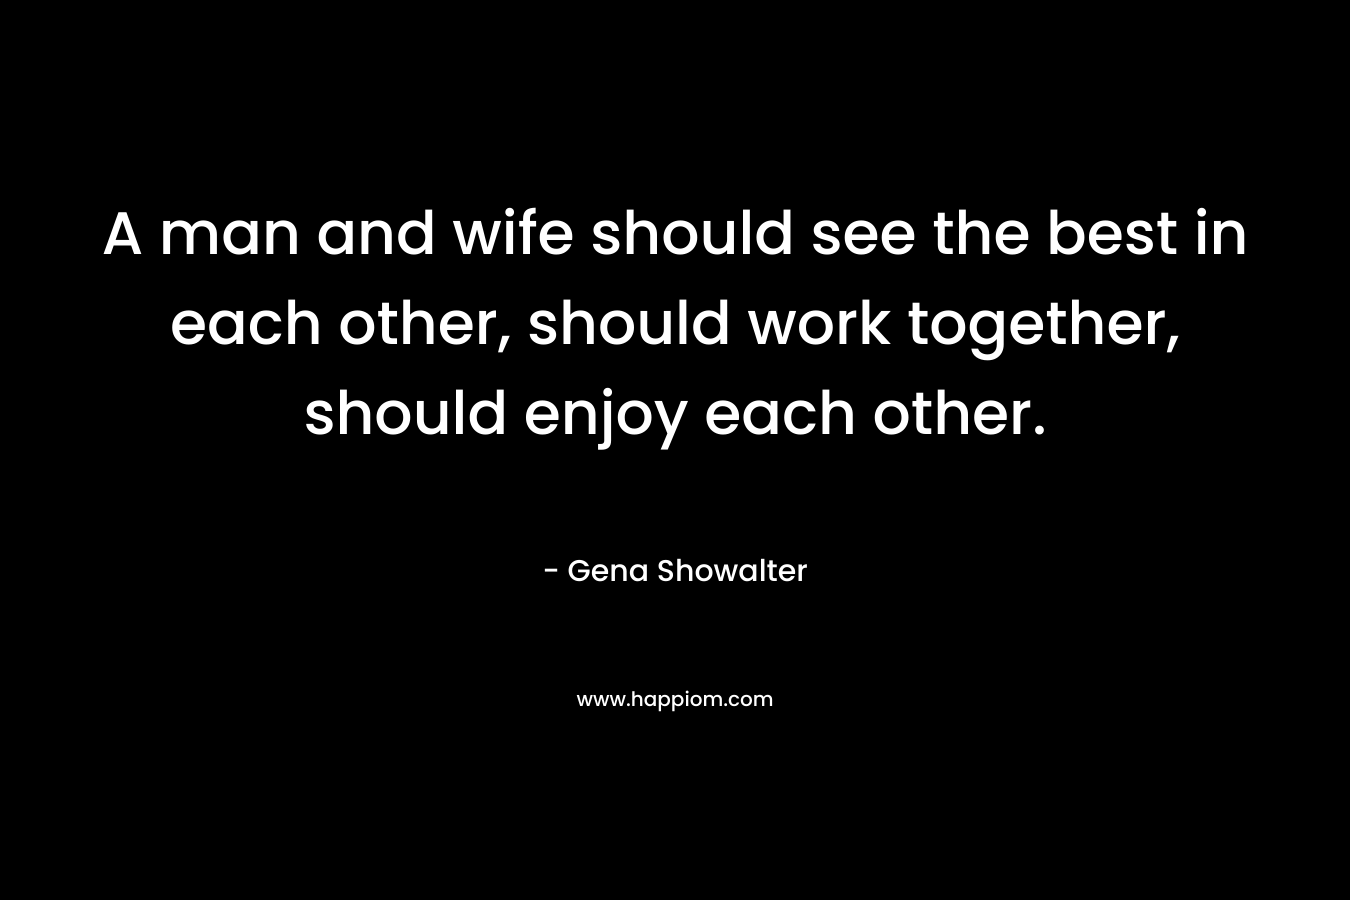 A man and wife should see the best in each other, should work together, should enjoy each other.